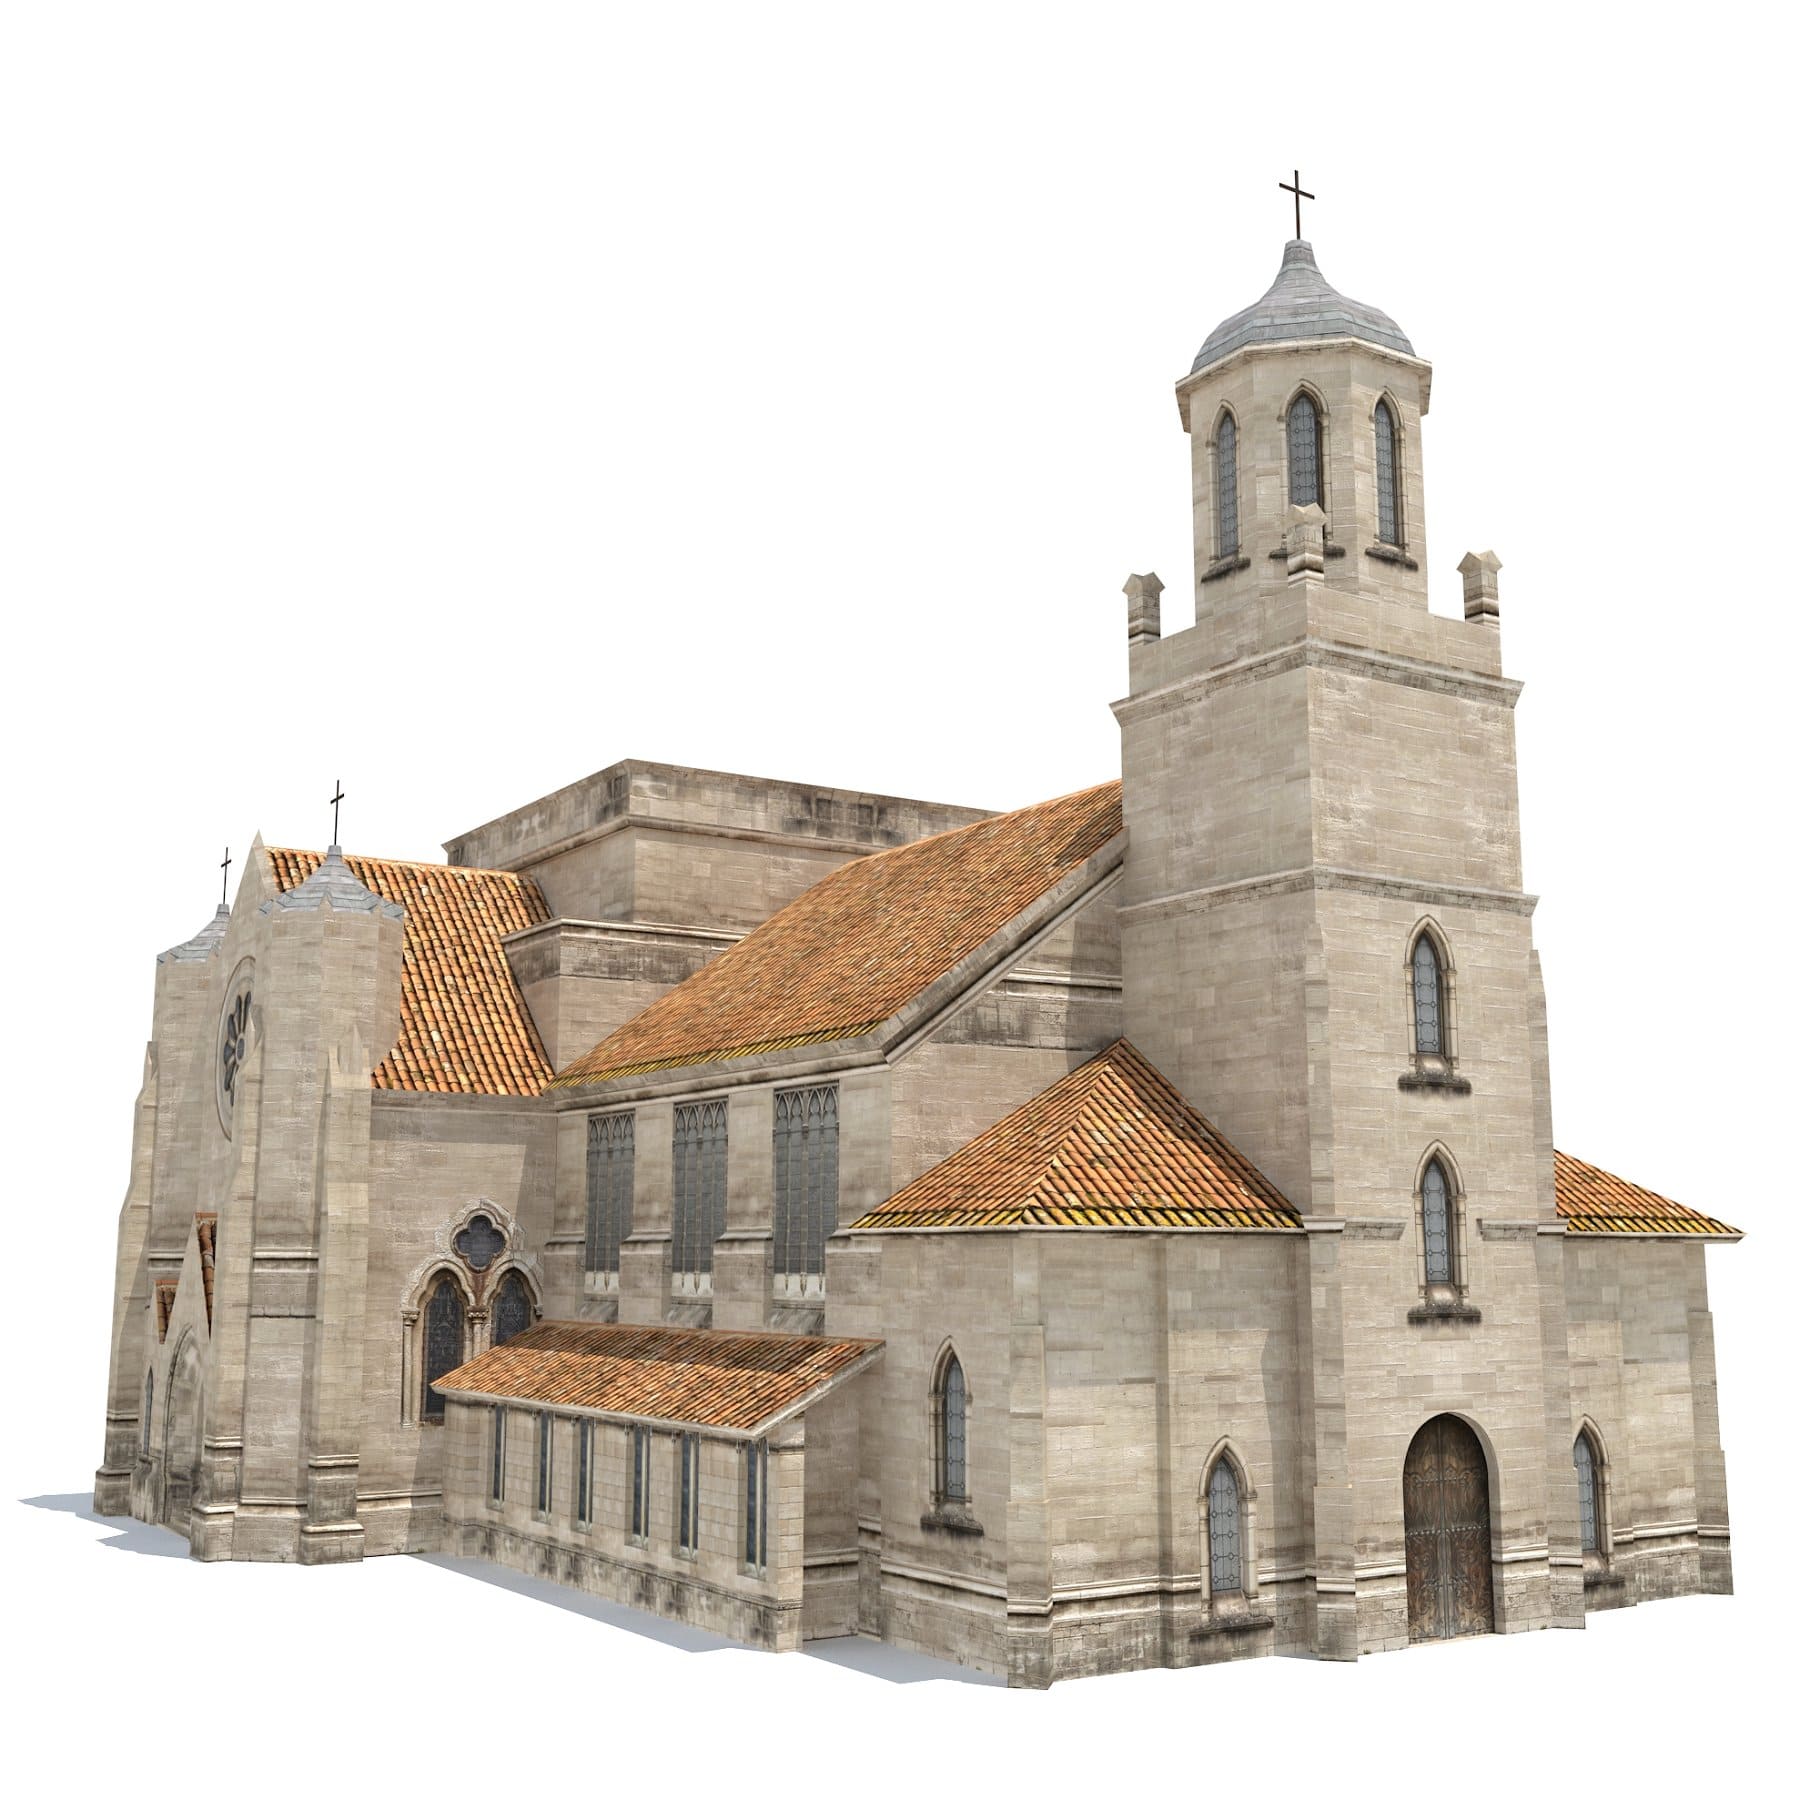 In the 3D model of the church building, windows of different shapes are combined.